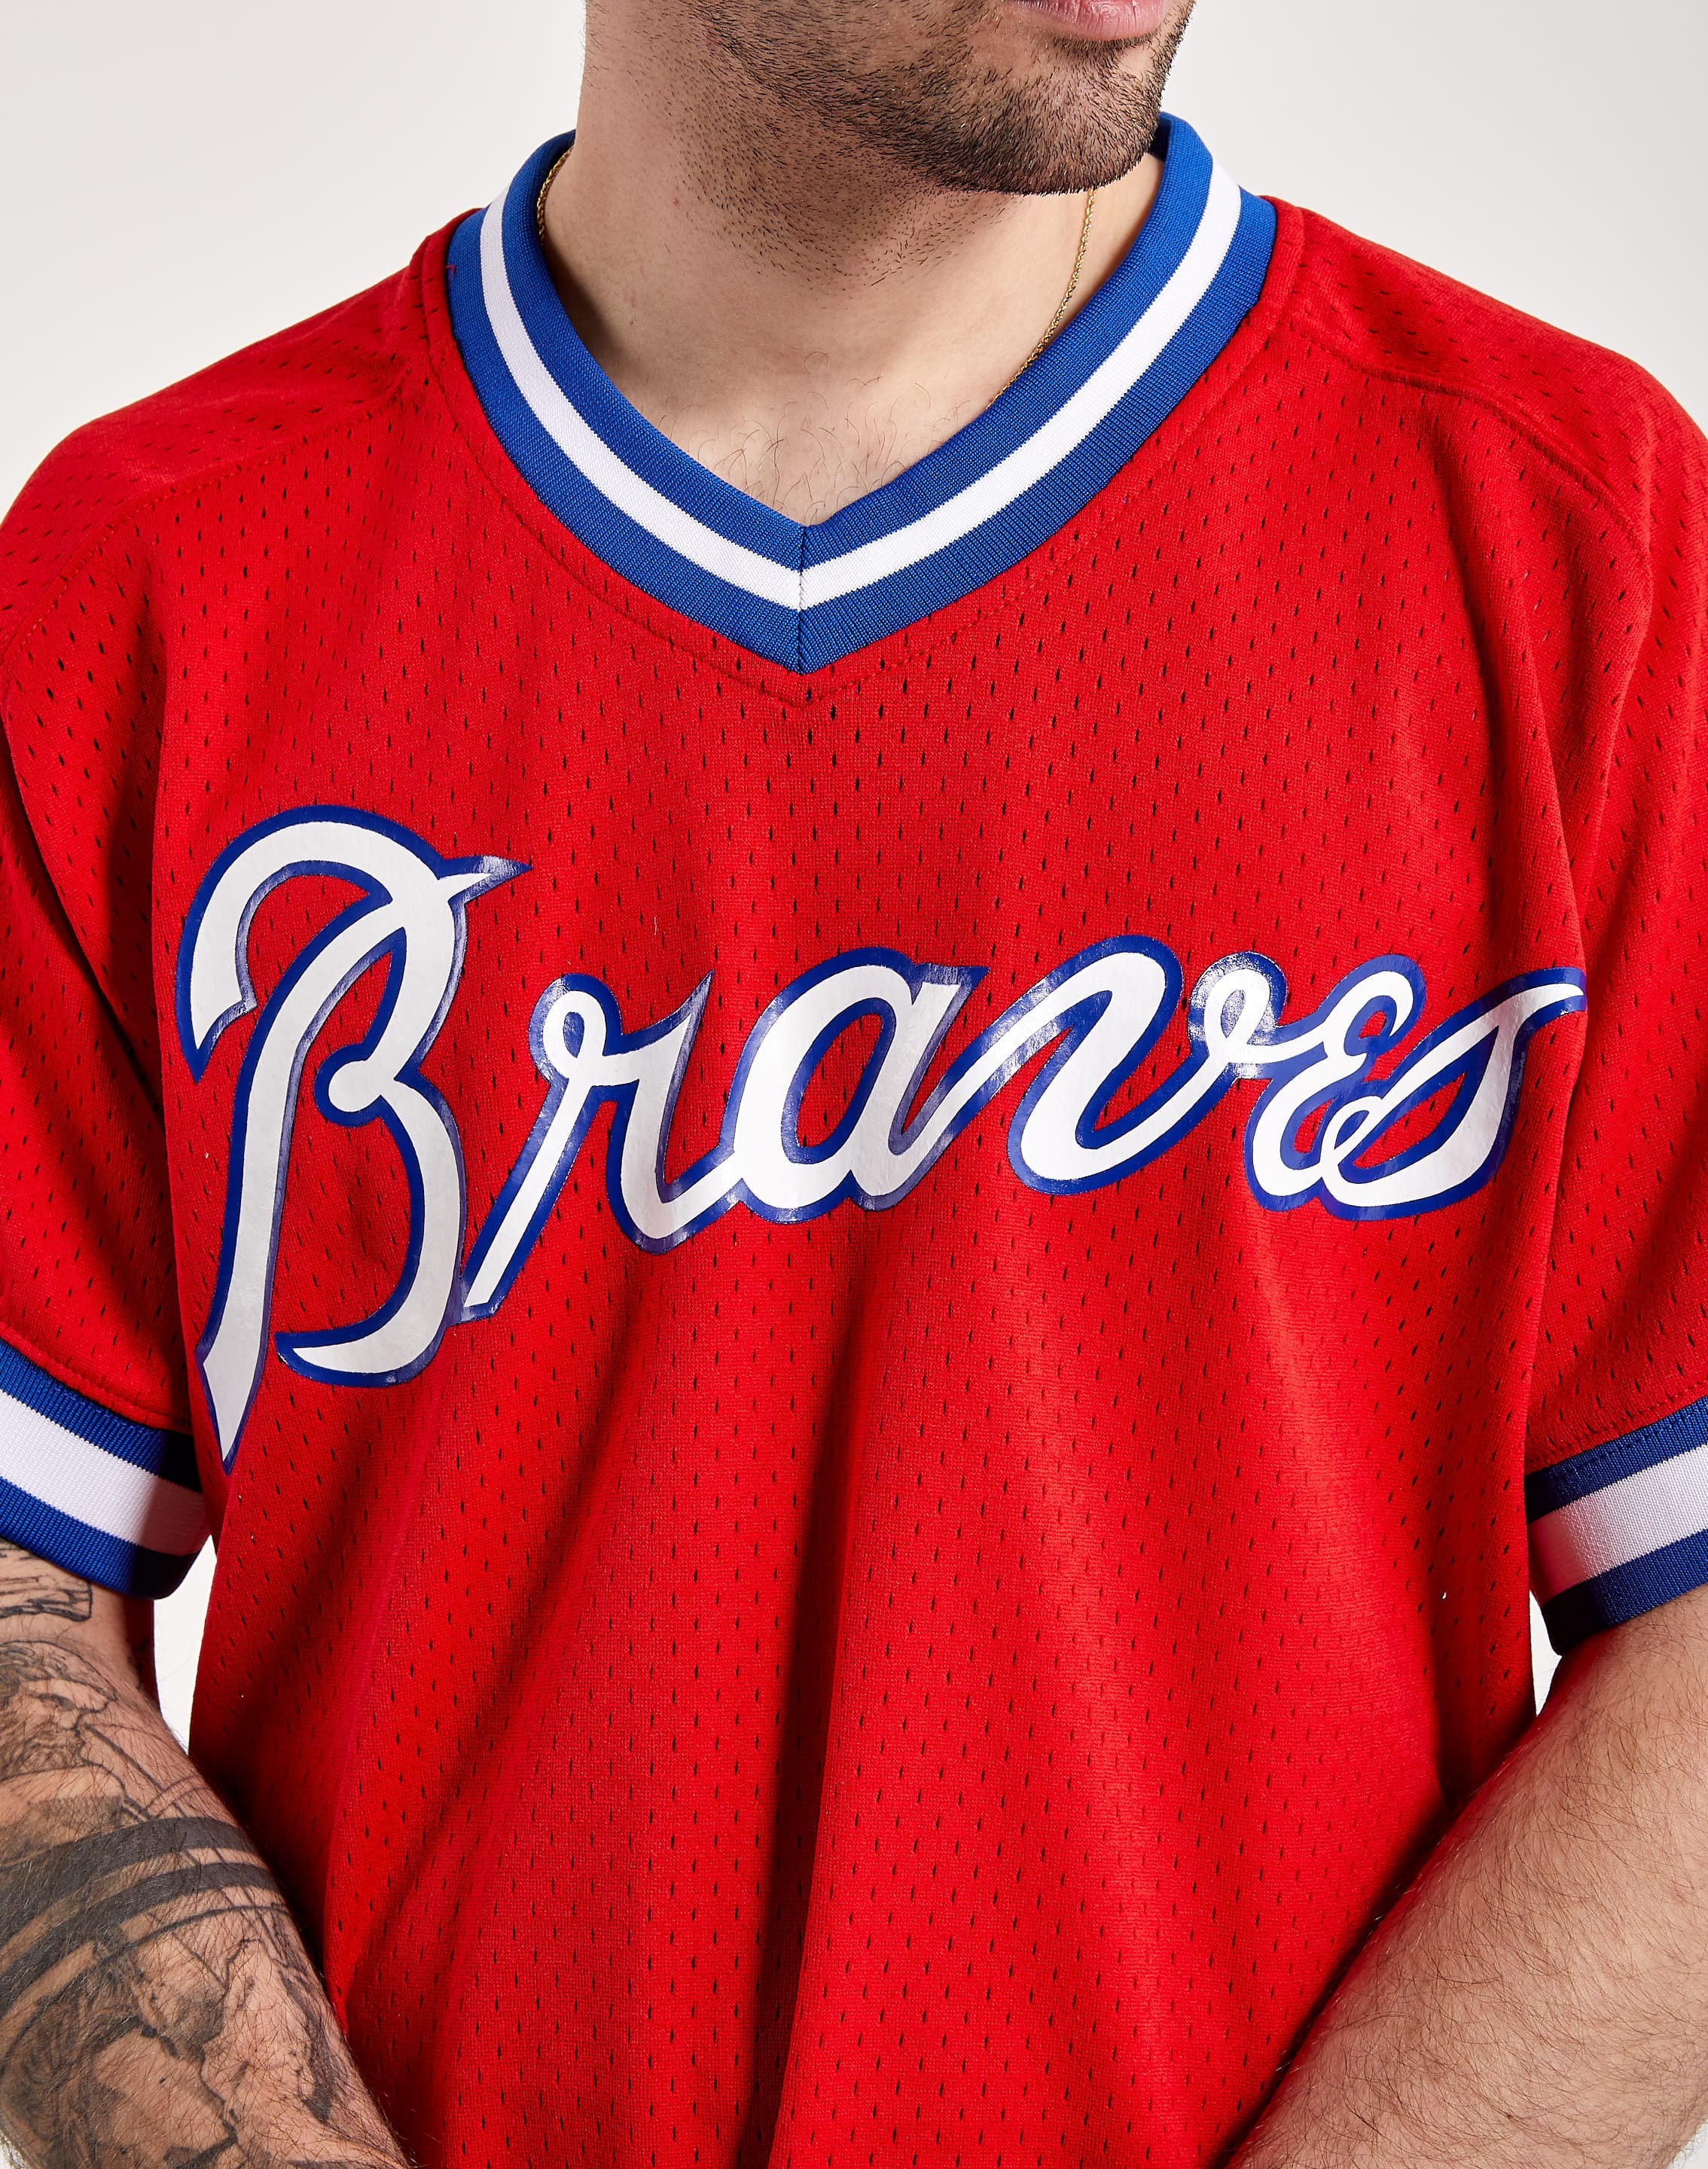 mitchell and ness braves jersey